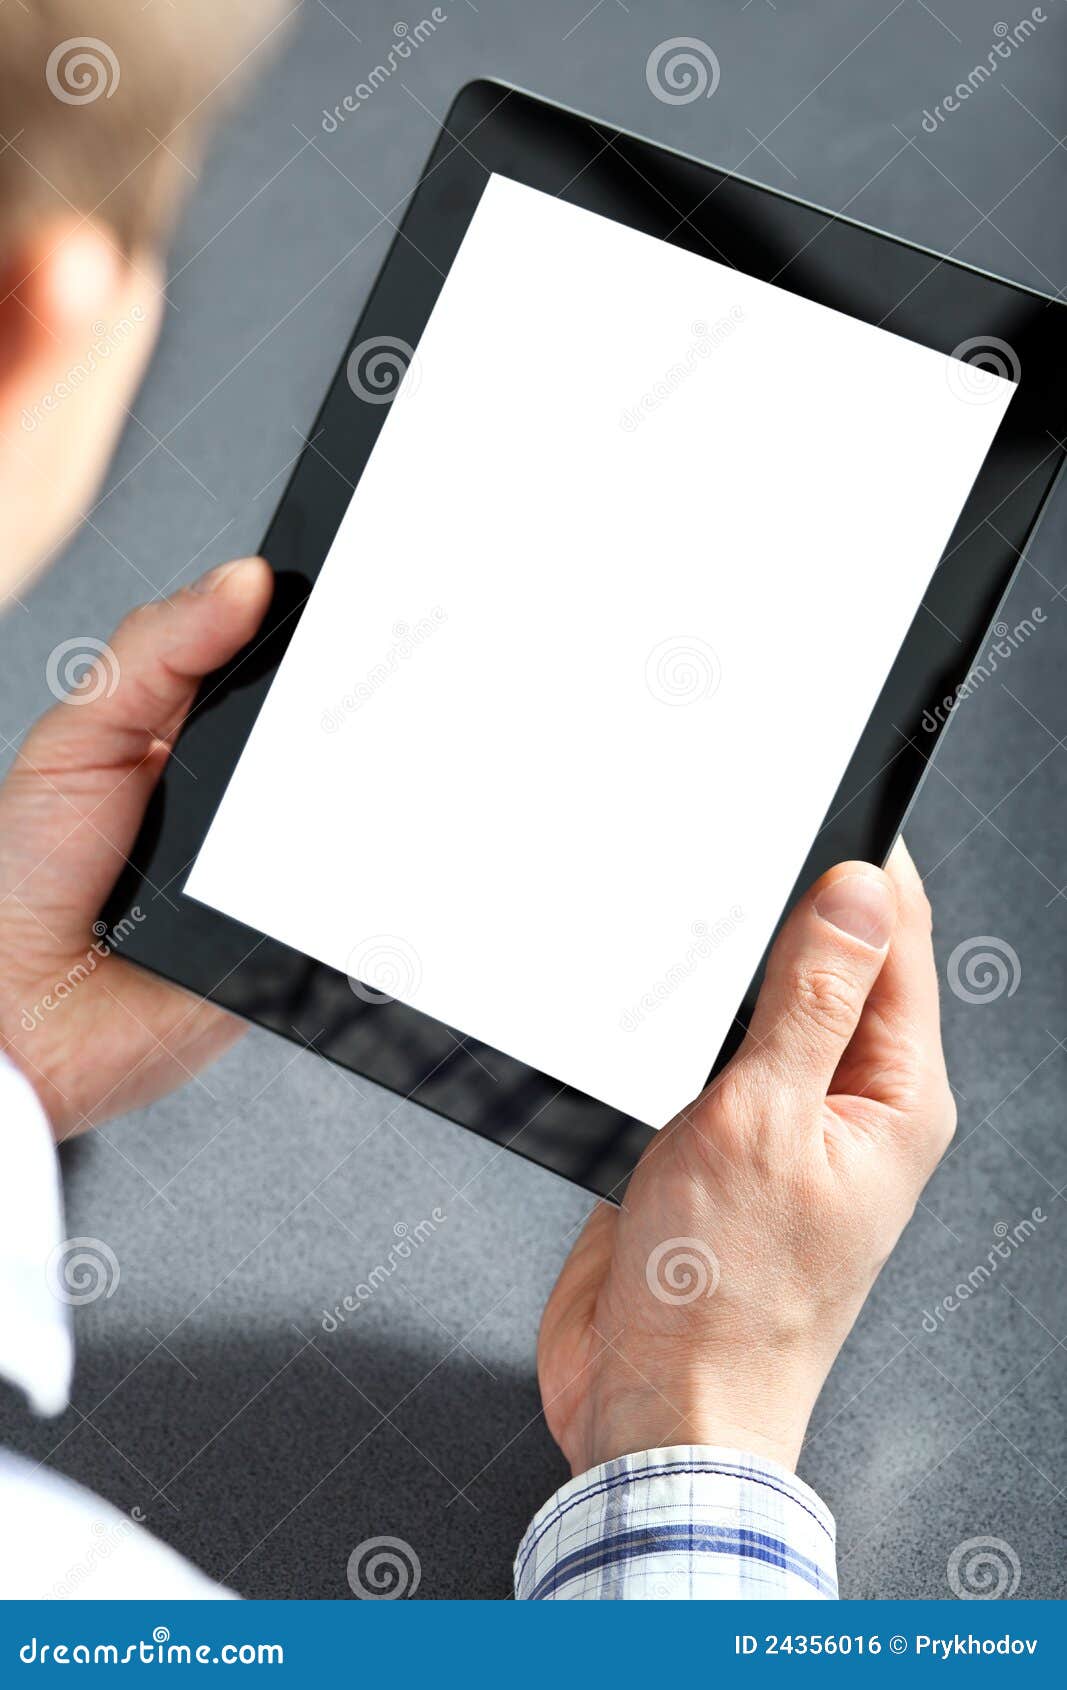 man holding a touchpad